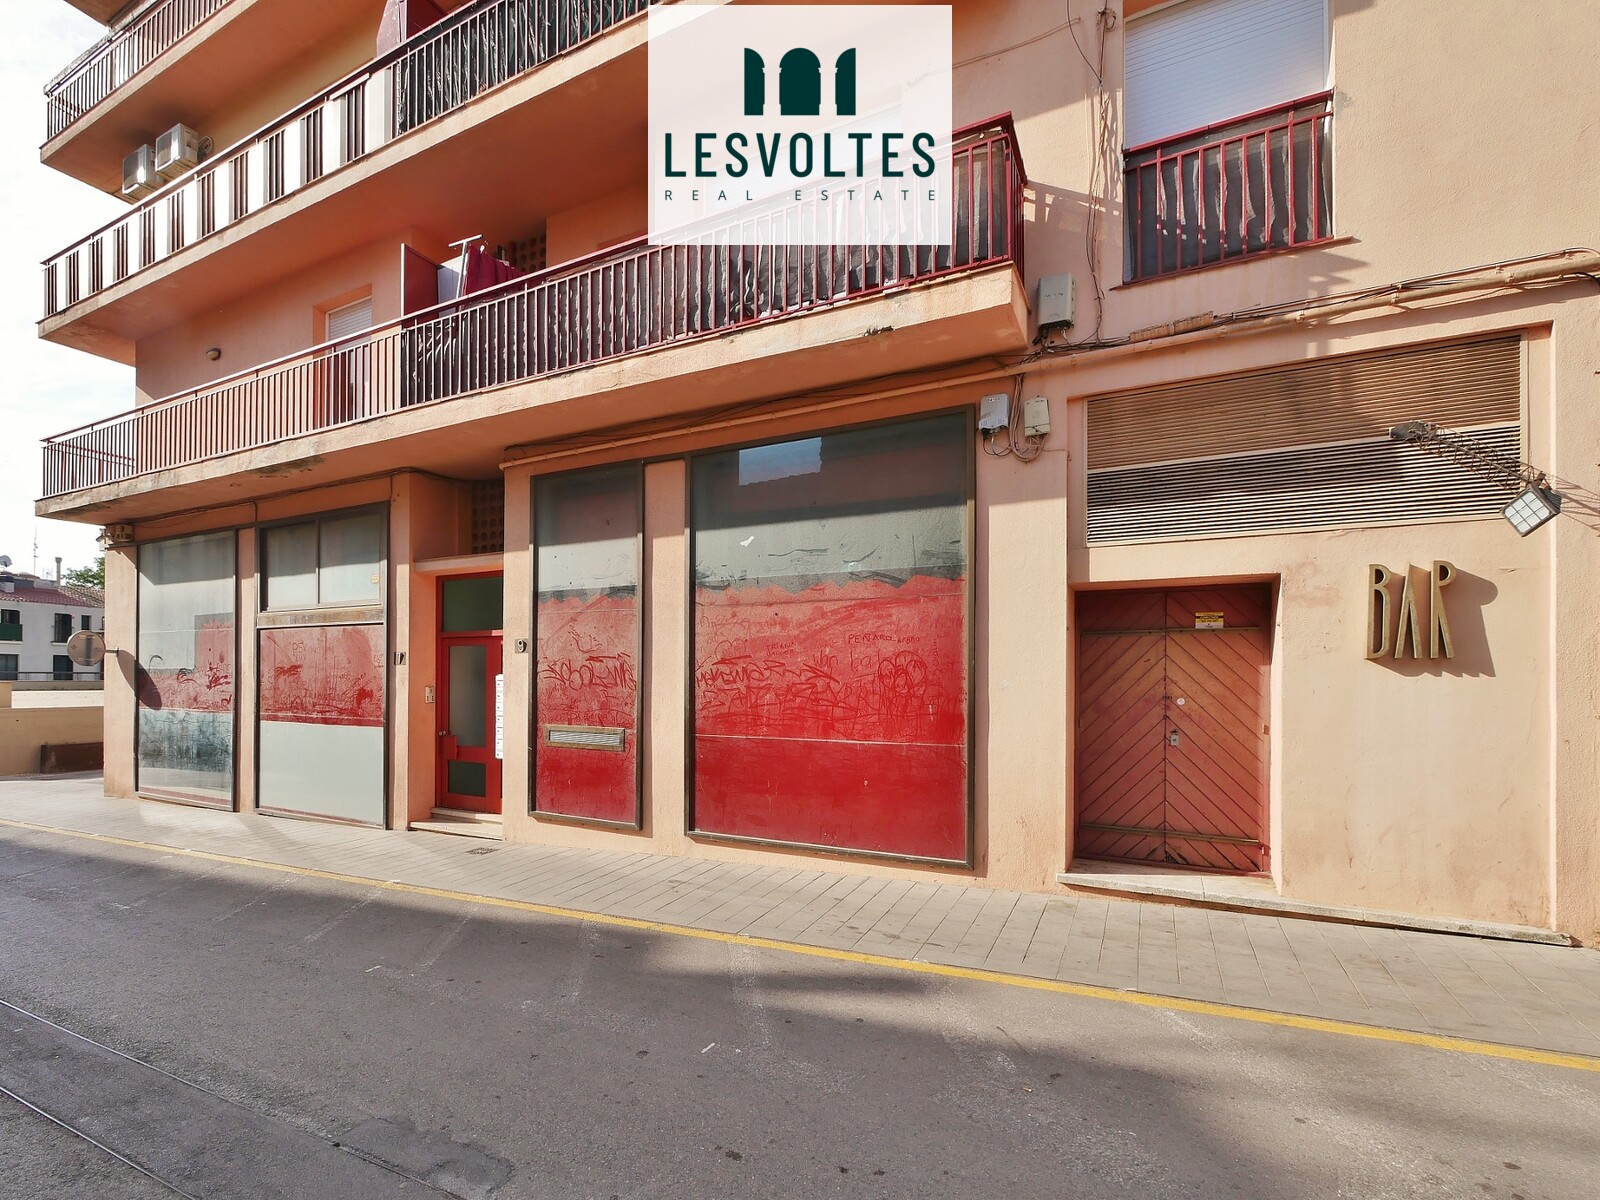 PREMISES ON TWO FLOORS, WITH A TOTAL OF 320 M², SITUATED IN THE CENTRE OF PALAFRUGELL.